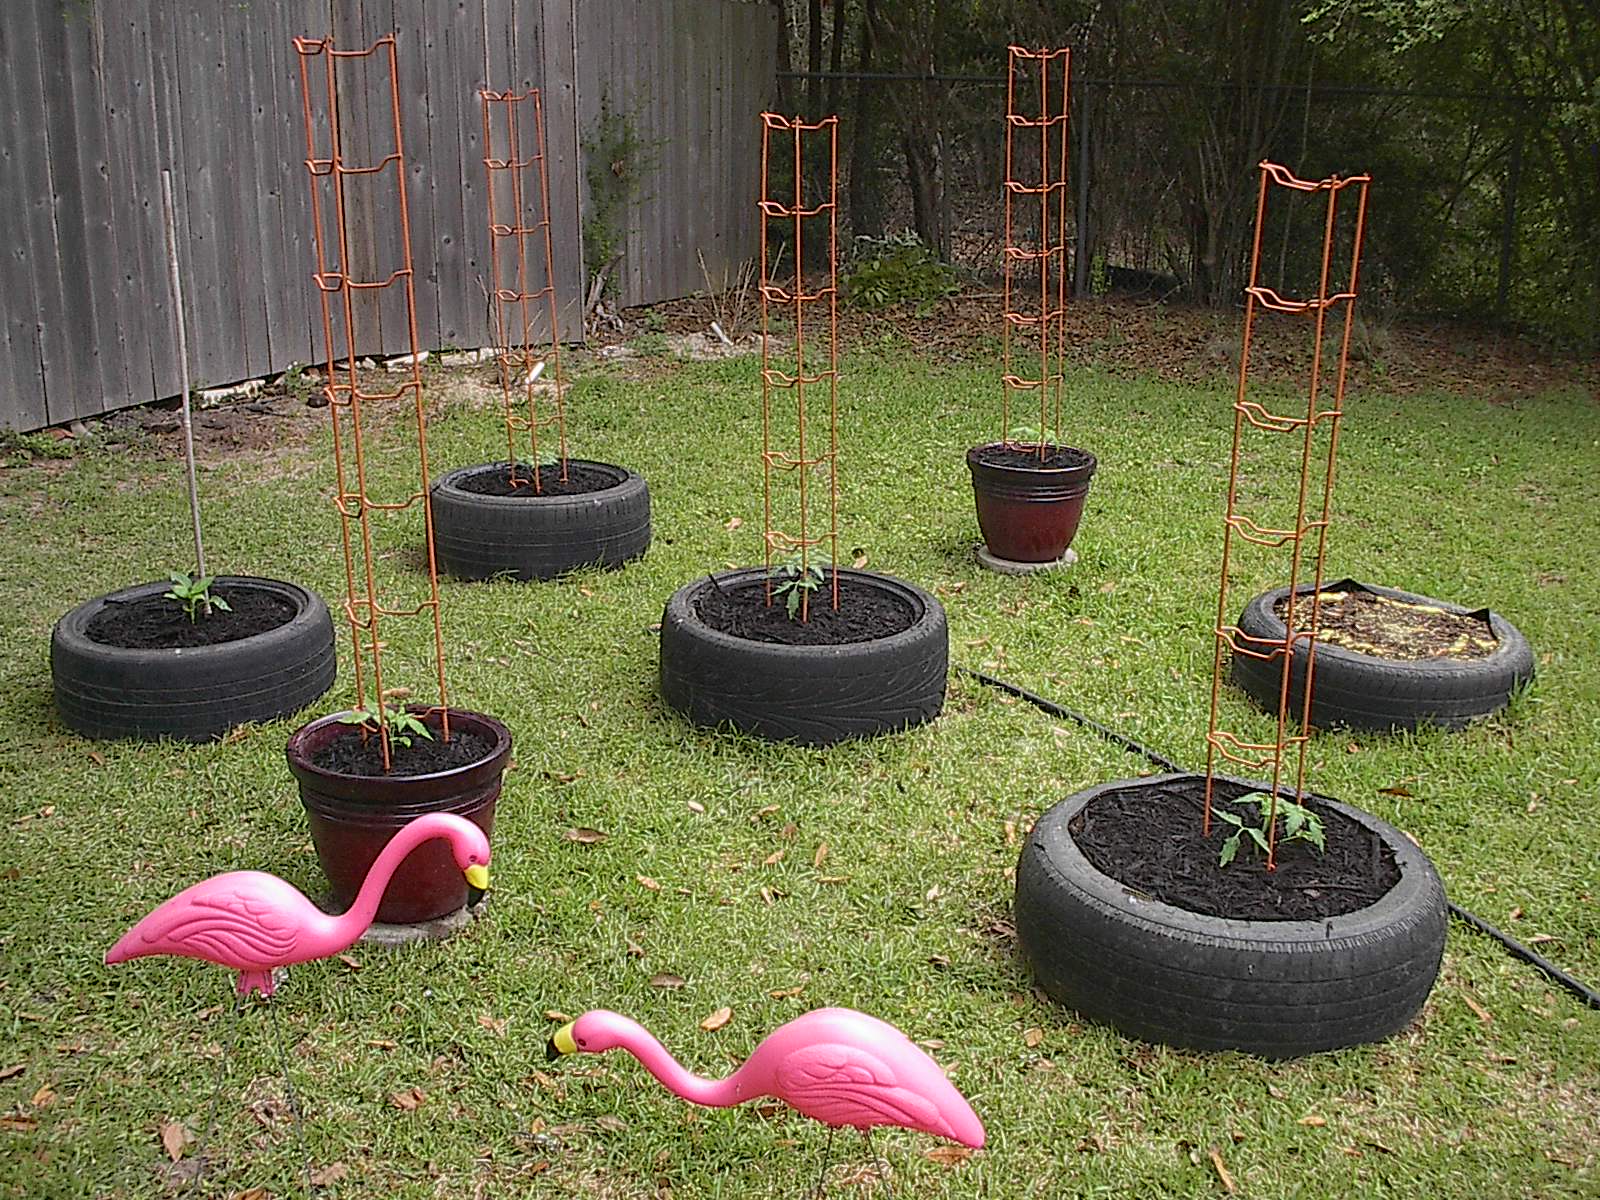 How to DIY Old Tire Garden Ideas —Recycled Backyard